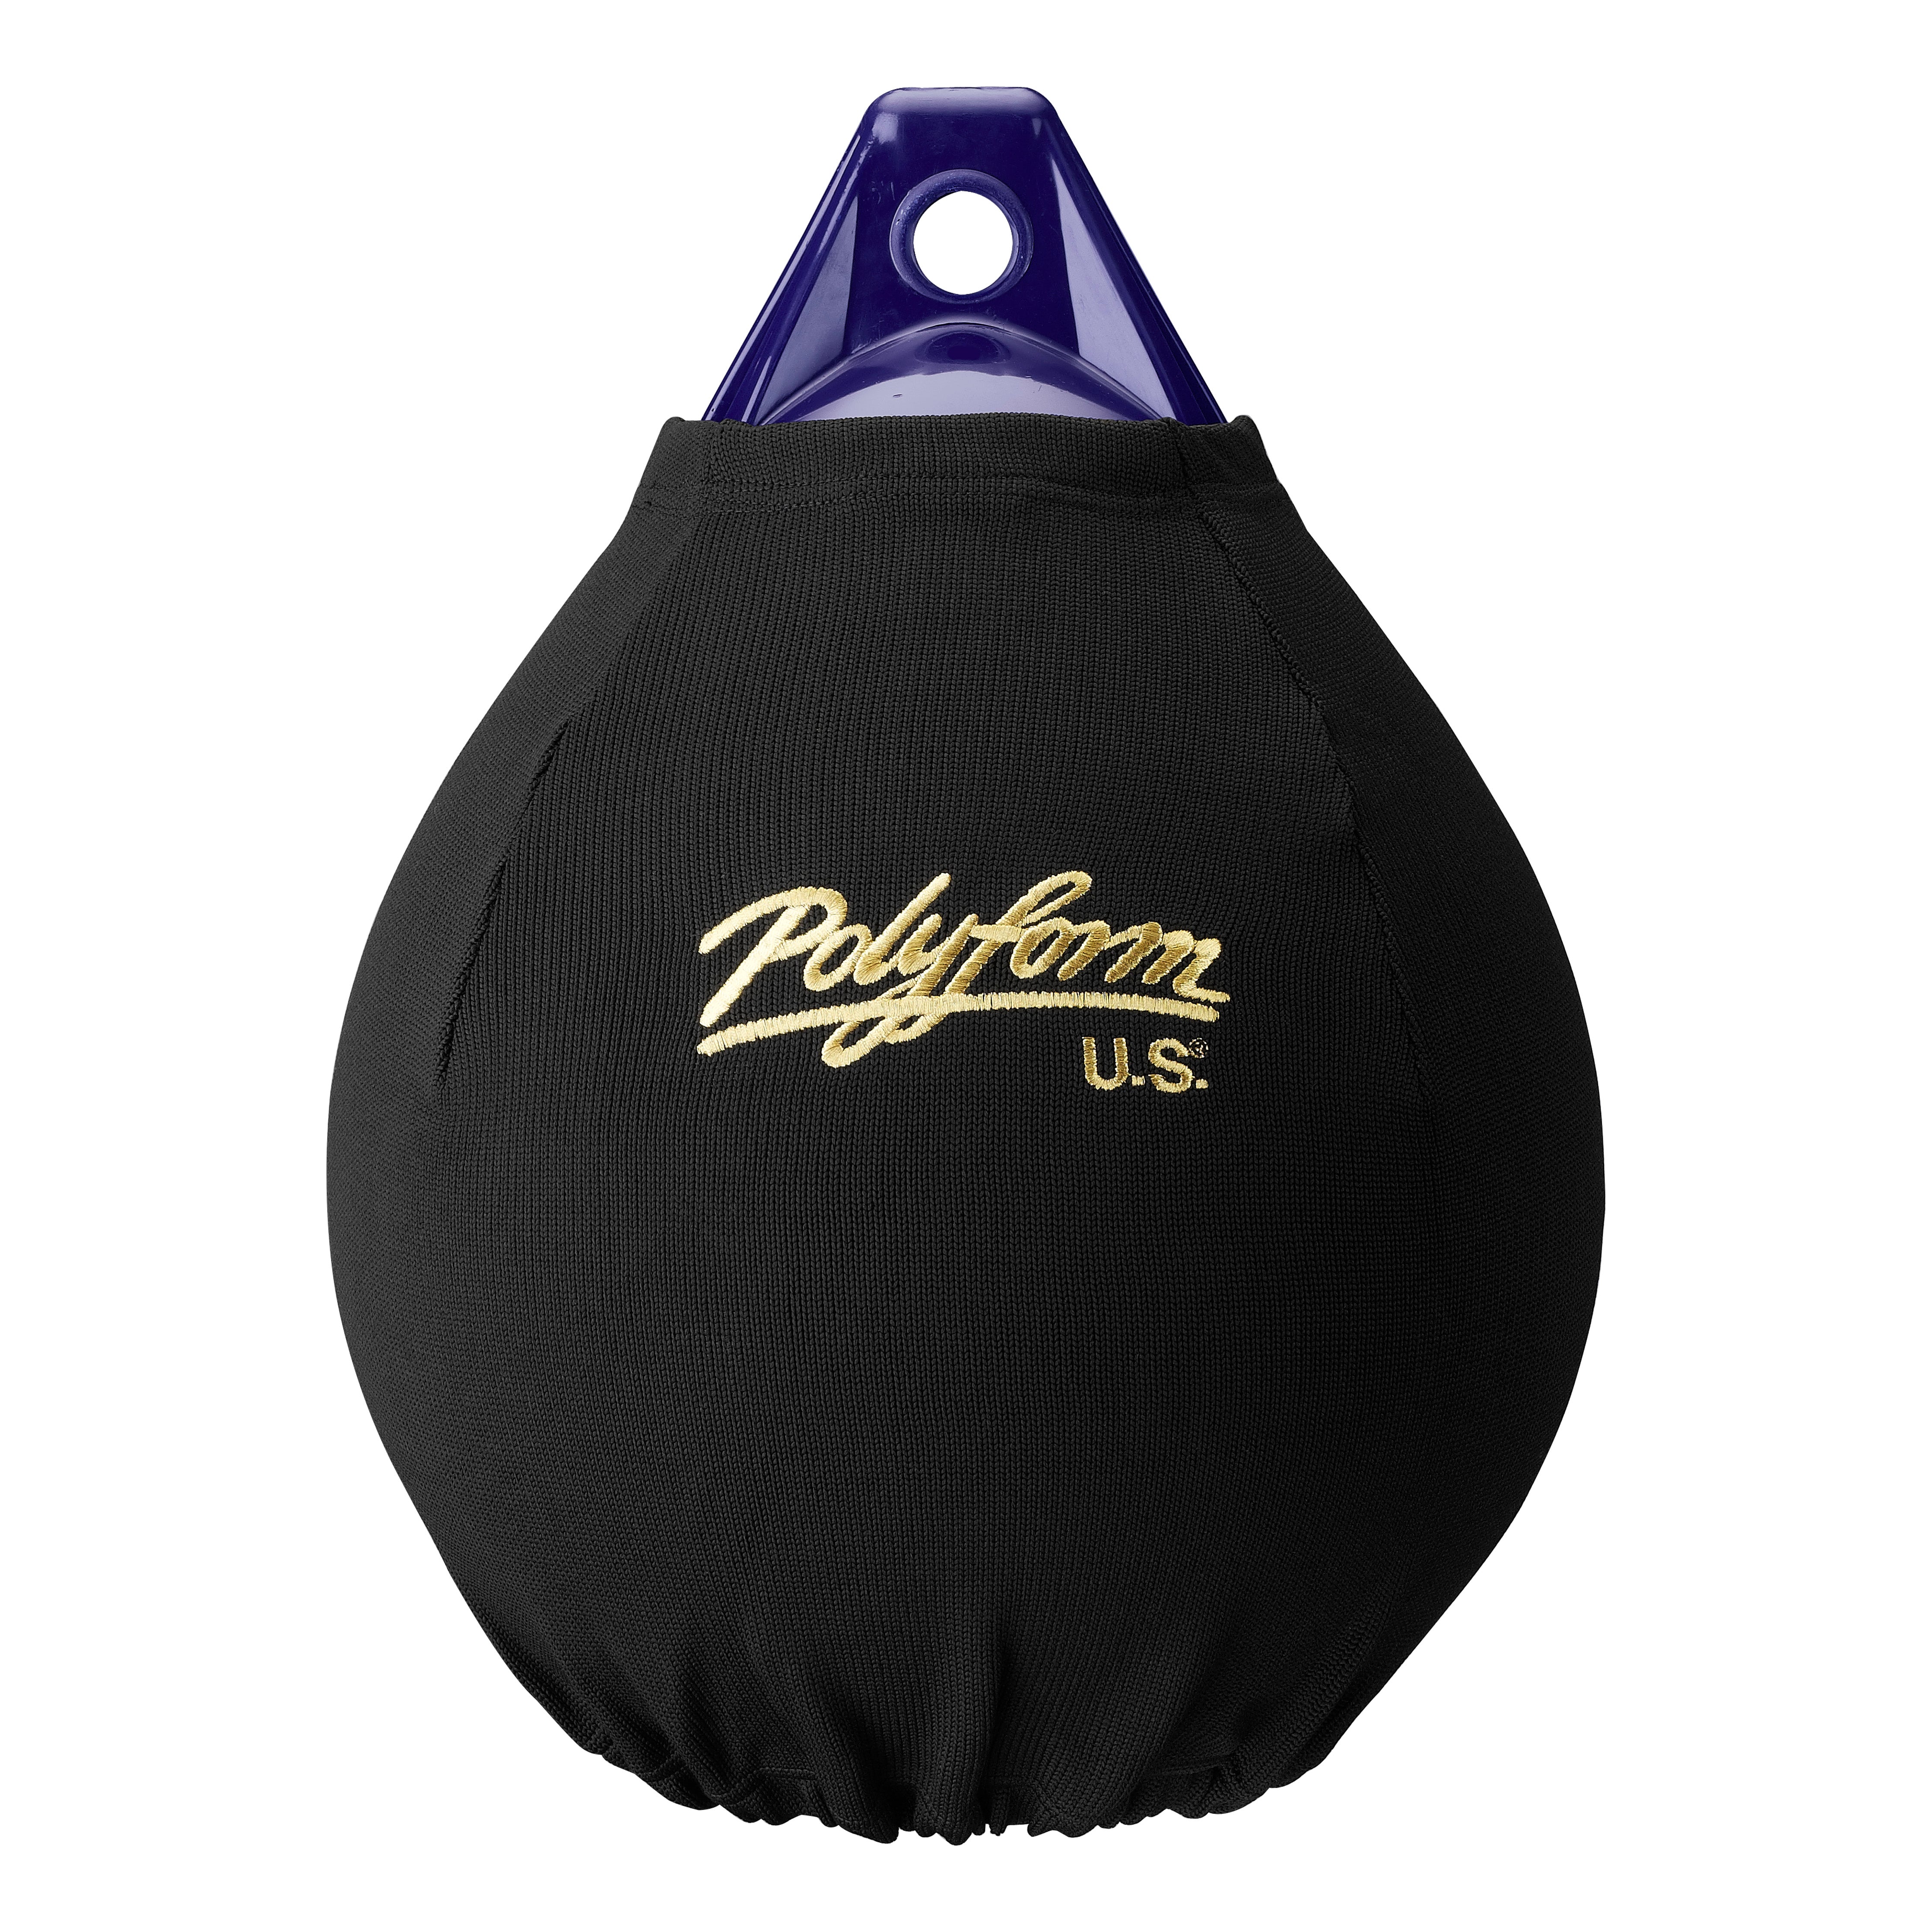 A-Series Buoy A-2 Navy Blue Ropehold – Polyform US